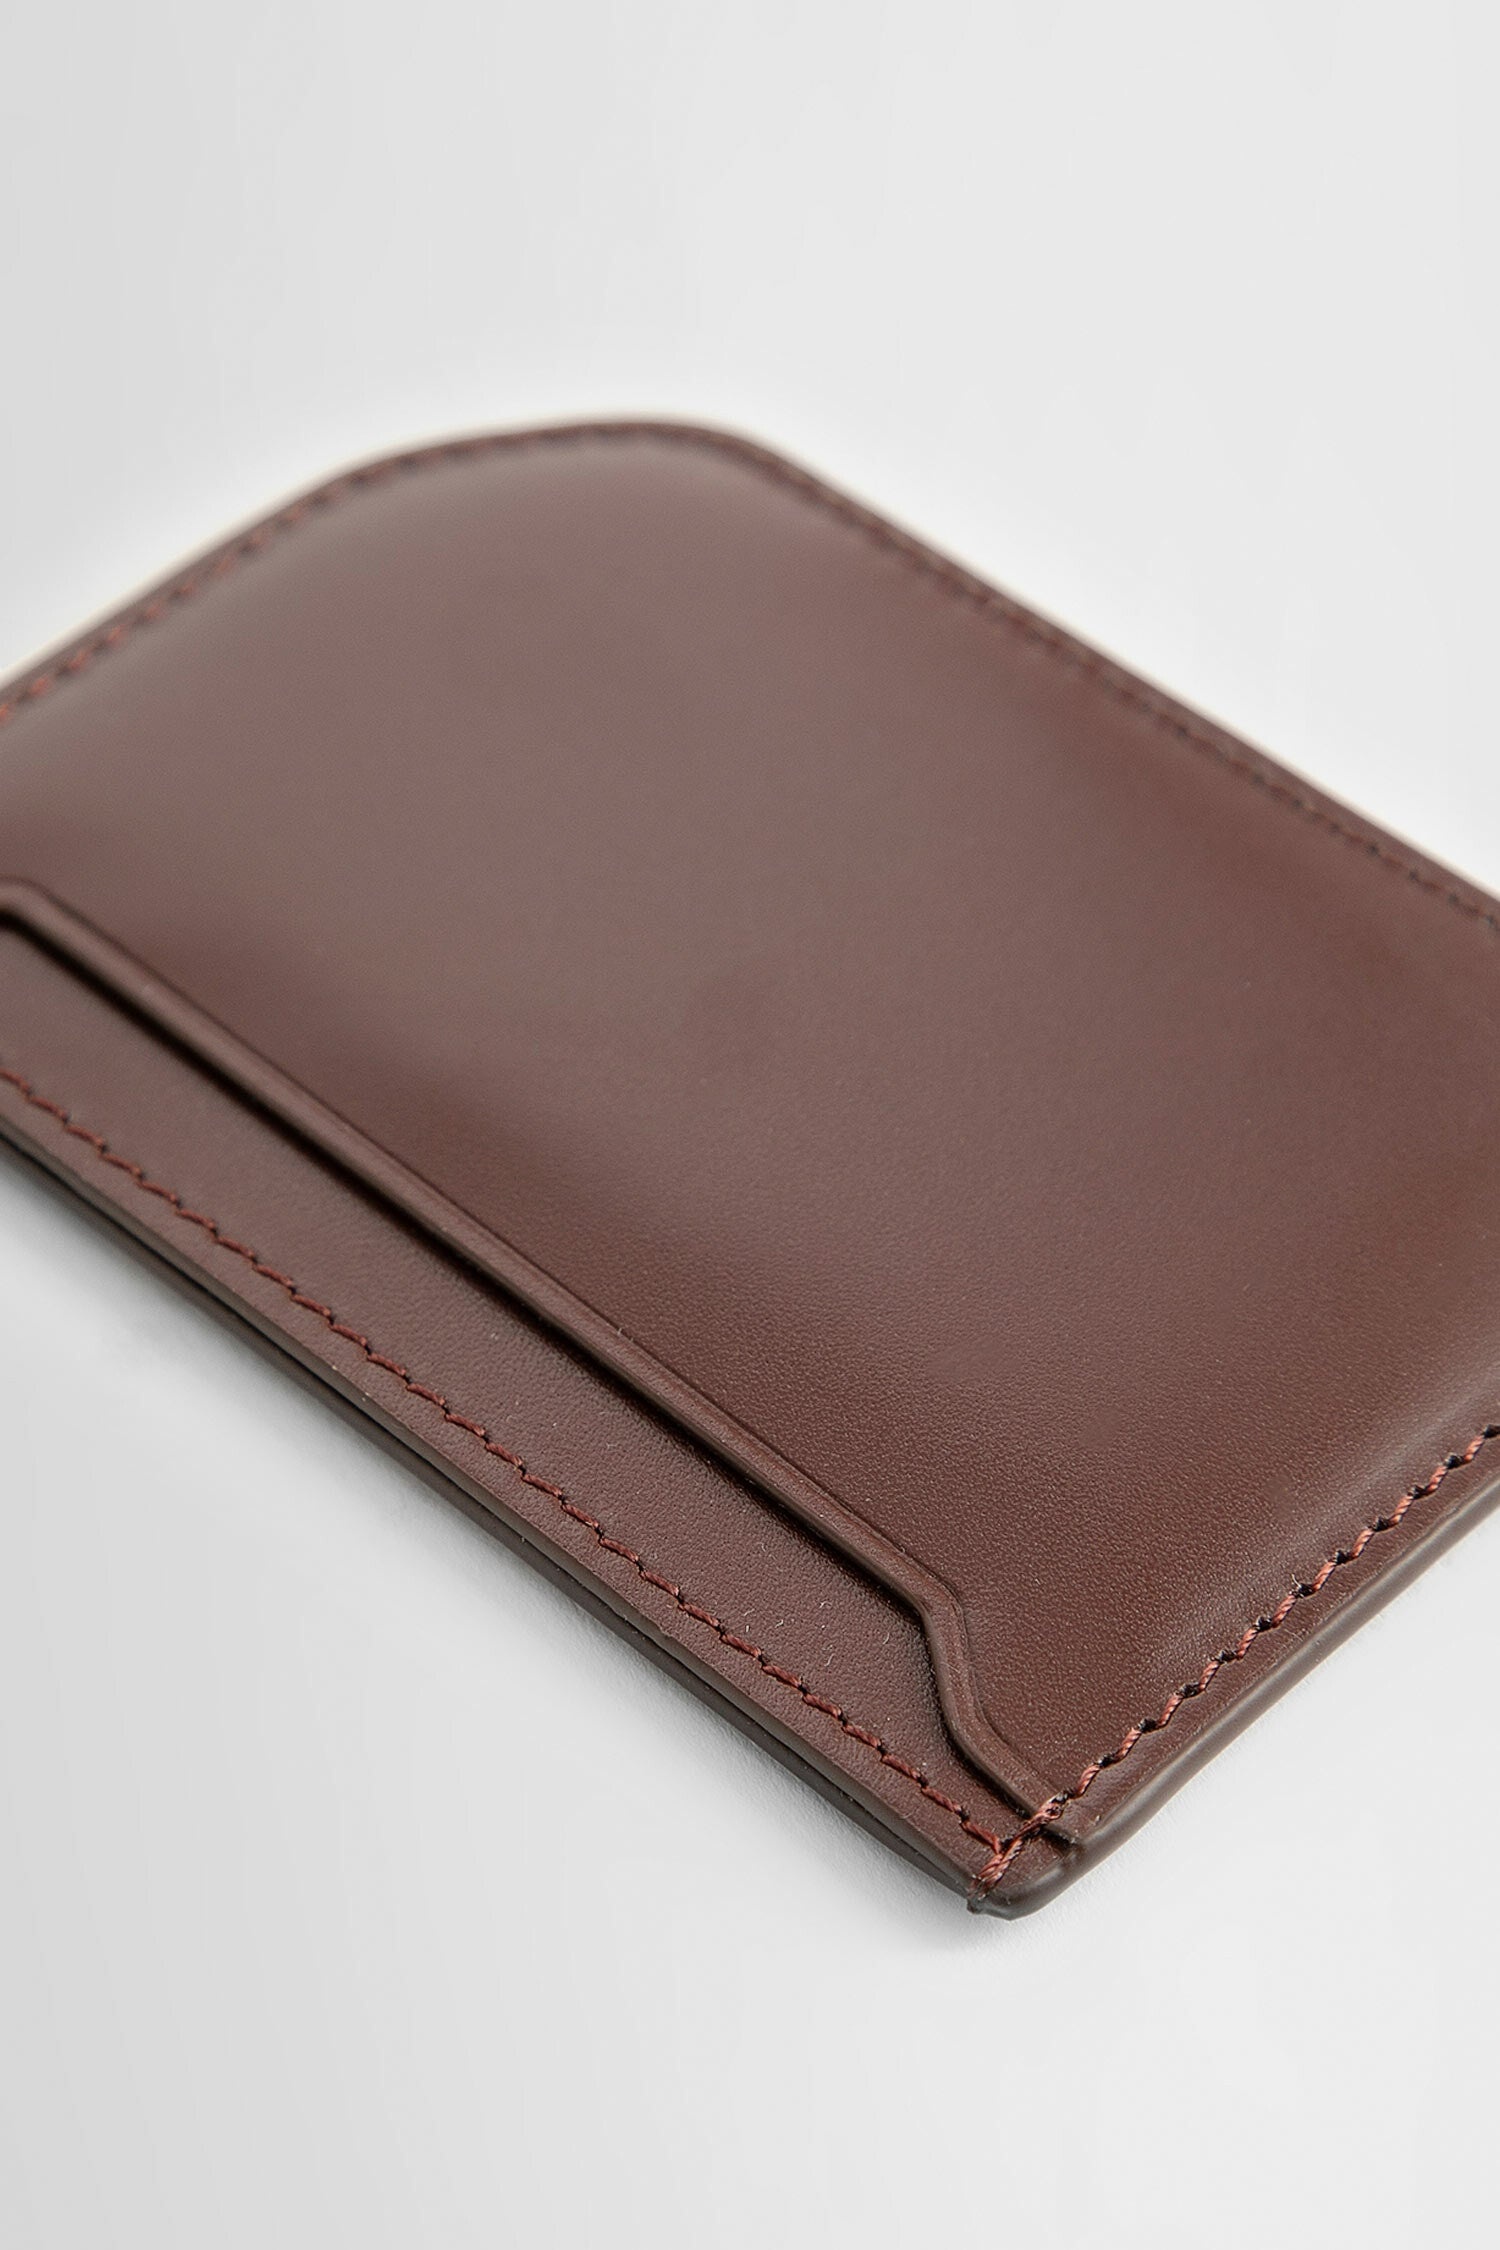 LEMAIRE UNISEX BROWN WALLETS & CARDHOLDERS - 3